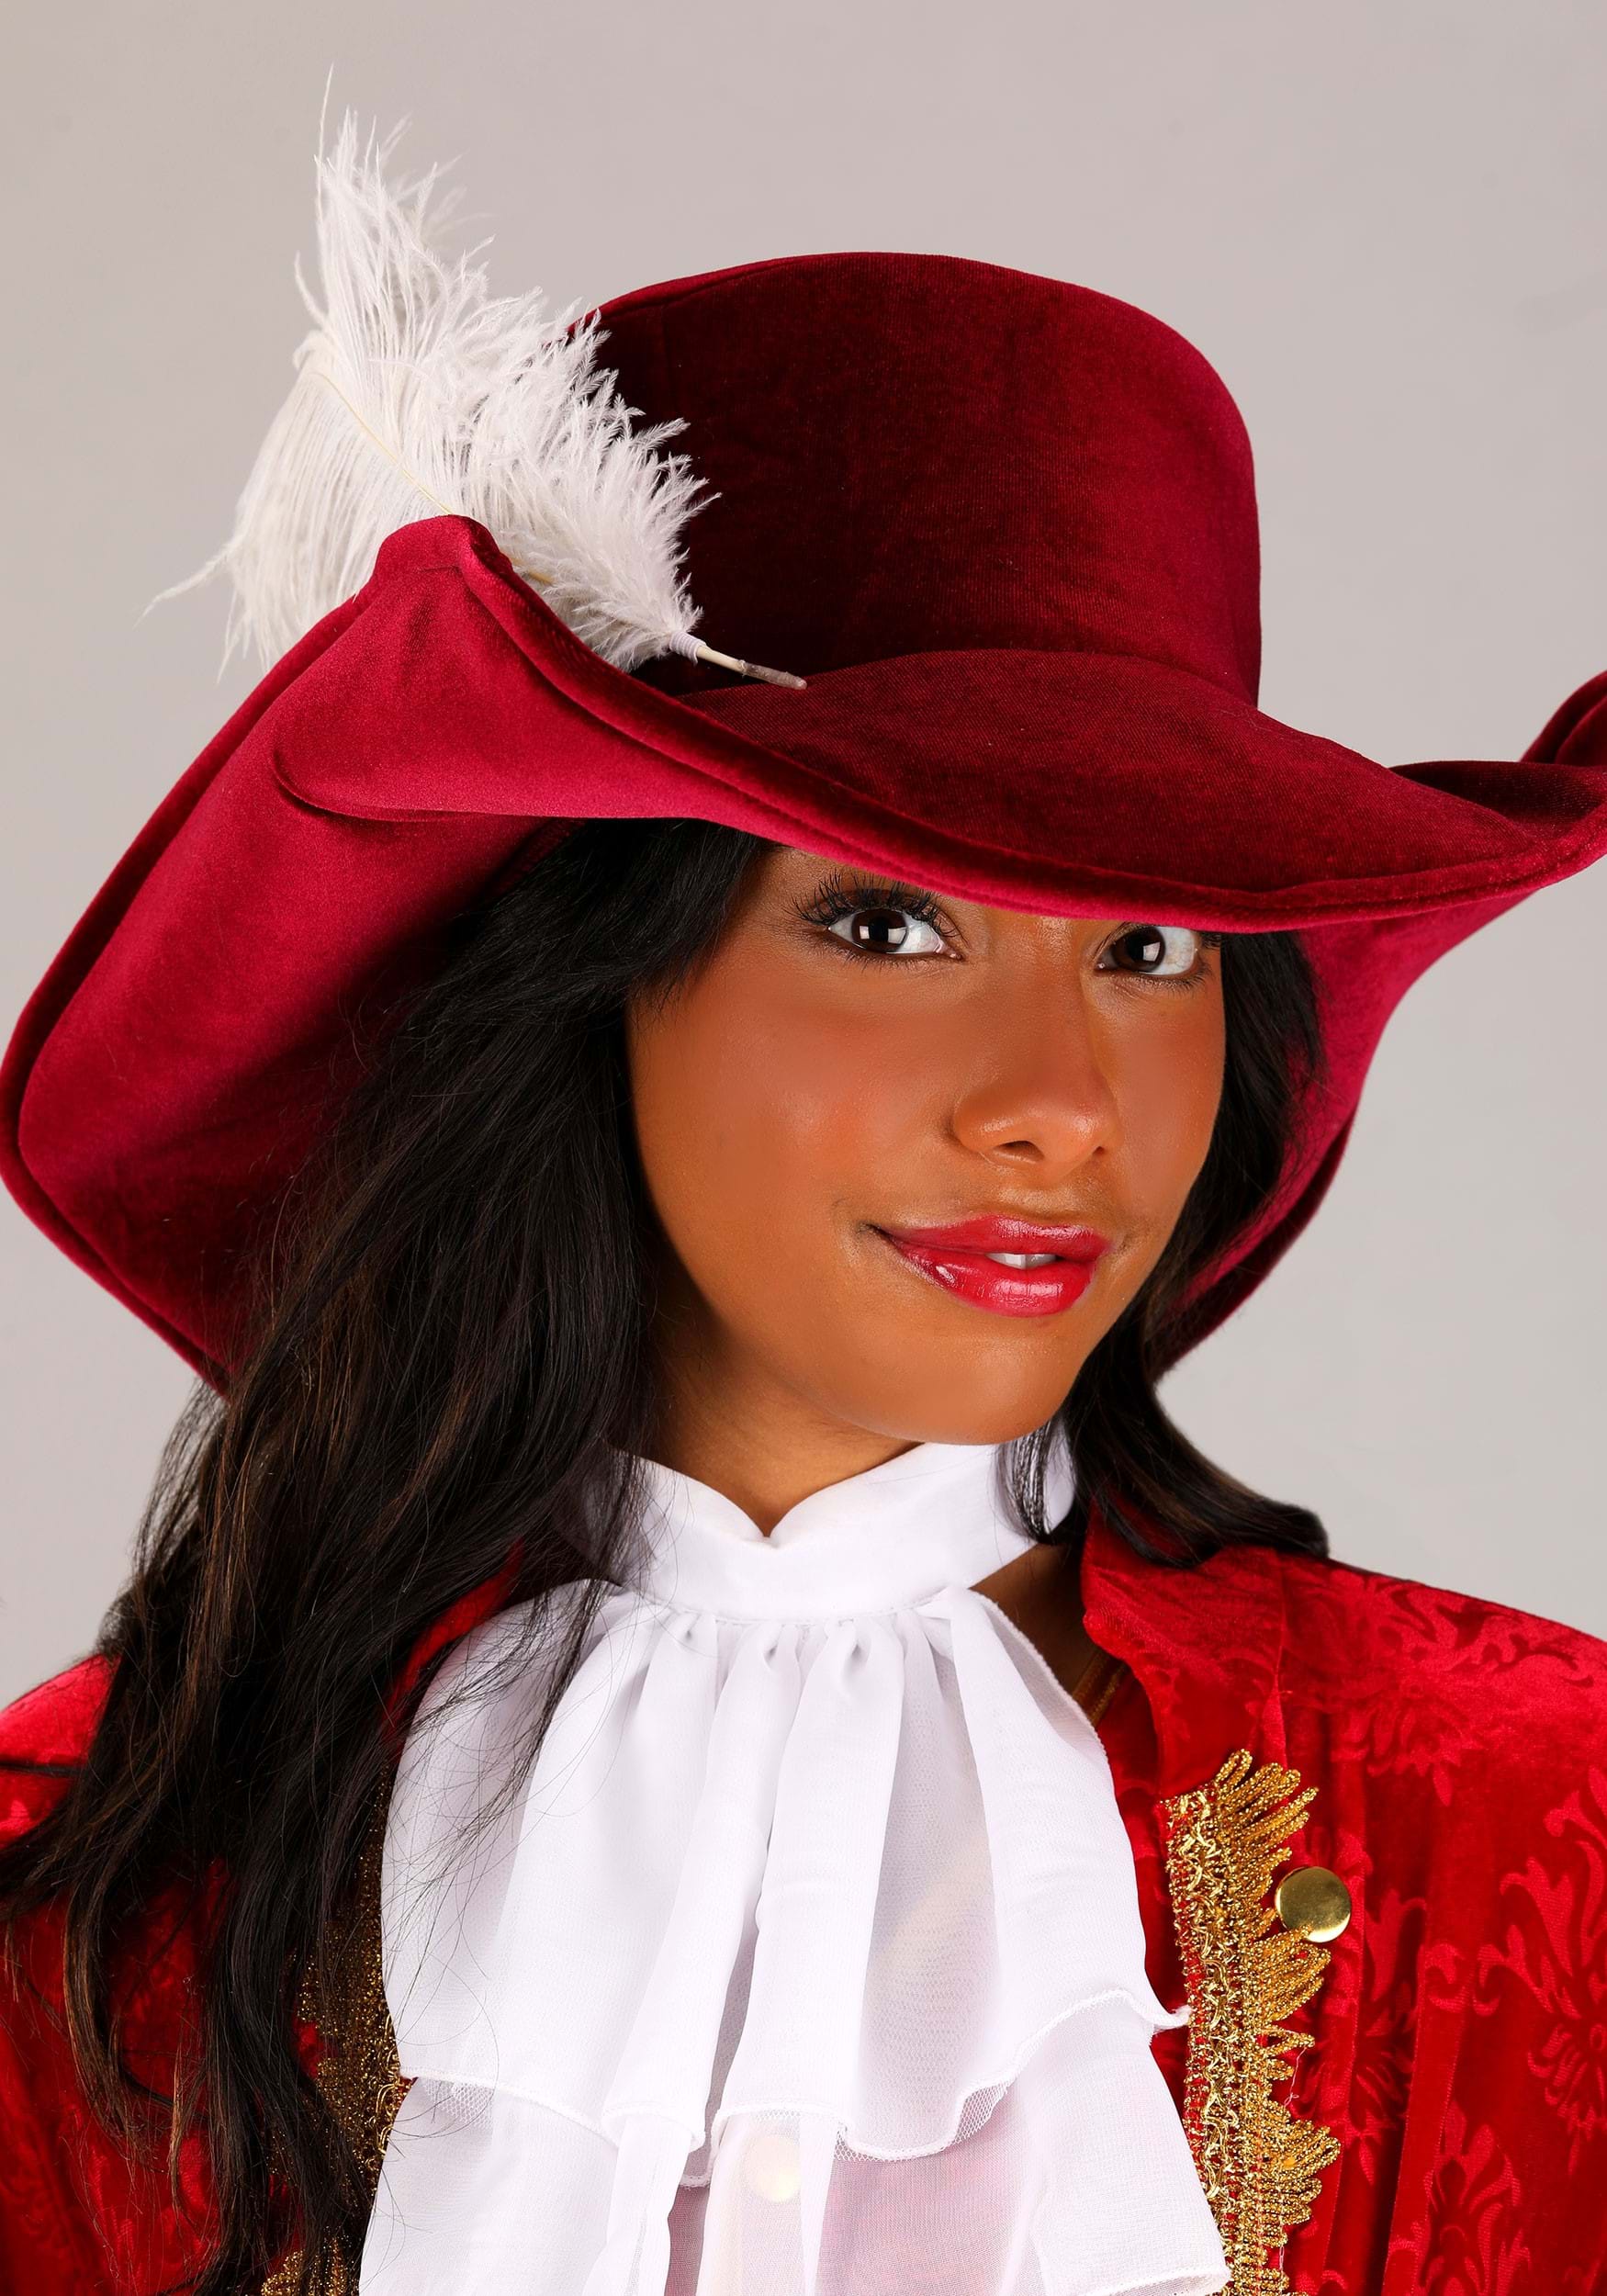 https://images.halloweencostumes.com/products/88556/2-1-287688/womens-deluxe-captain-hook-costume-alt-2.jpg